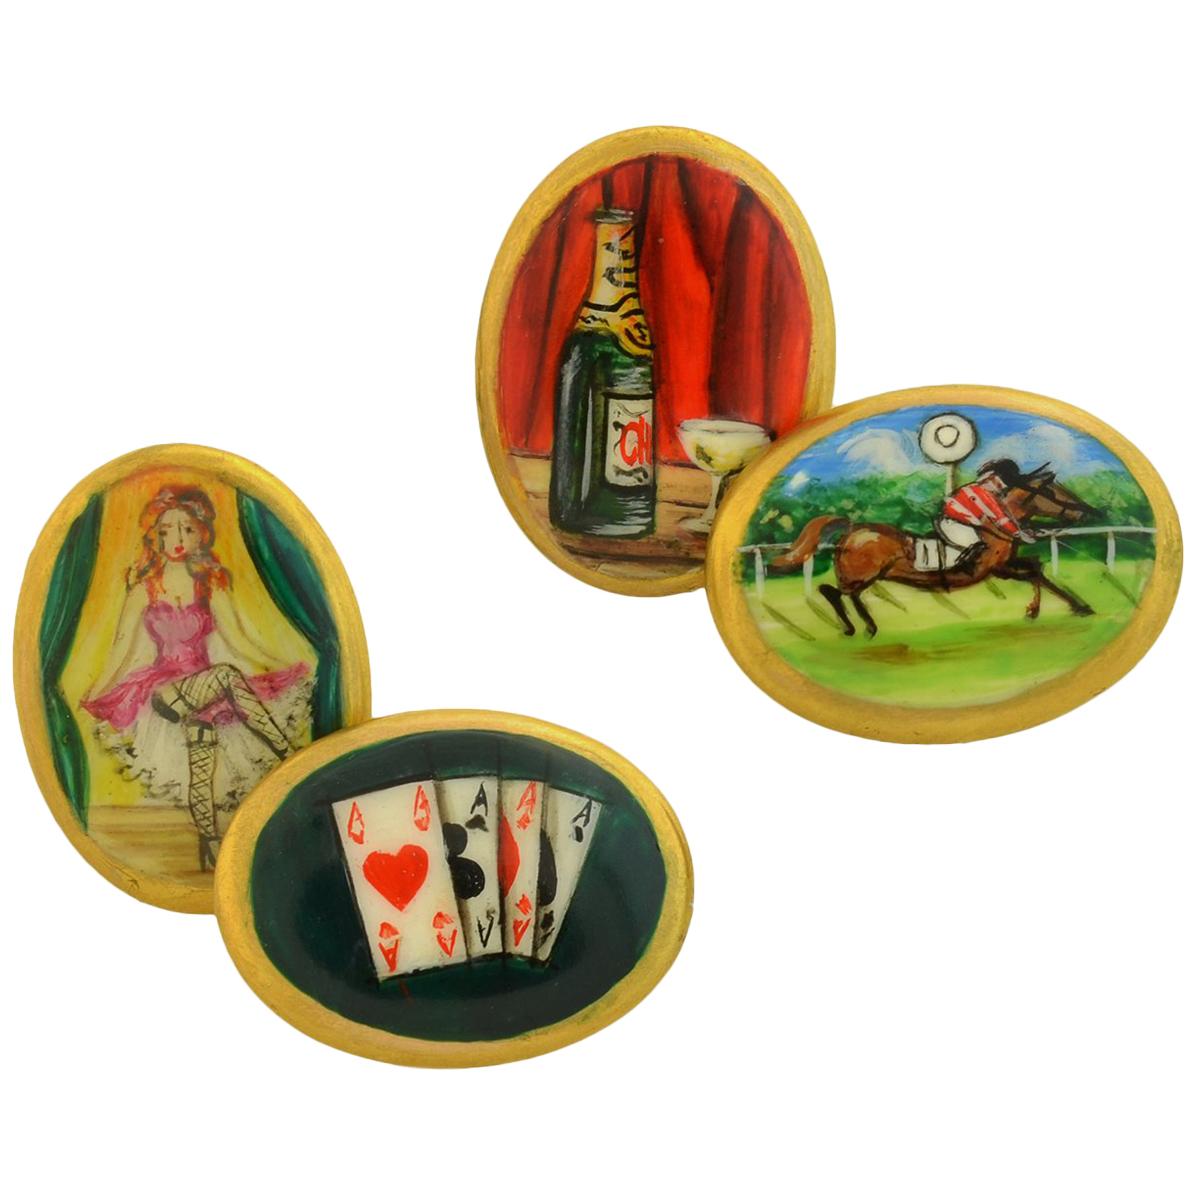 Contemporary English "Four Vices" Hand Painted Enameled Cufflinks